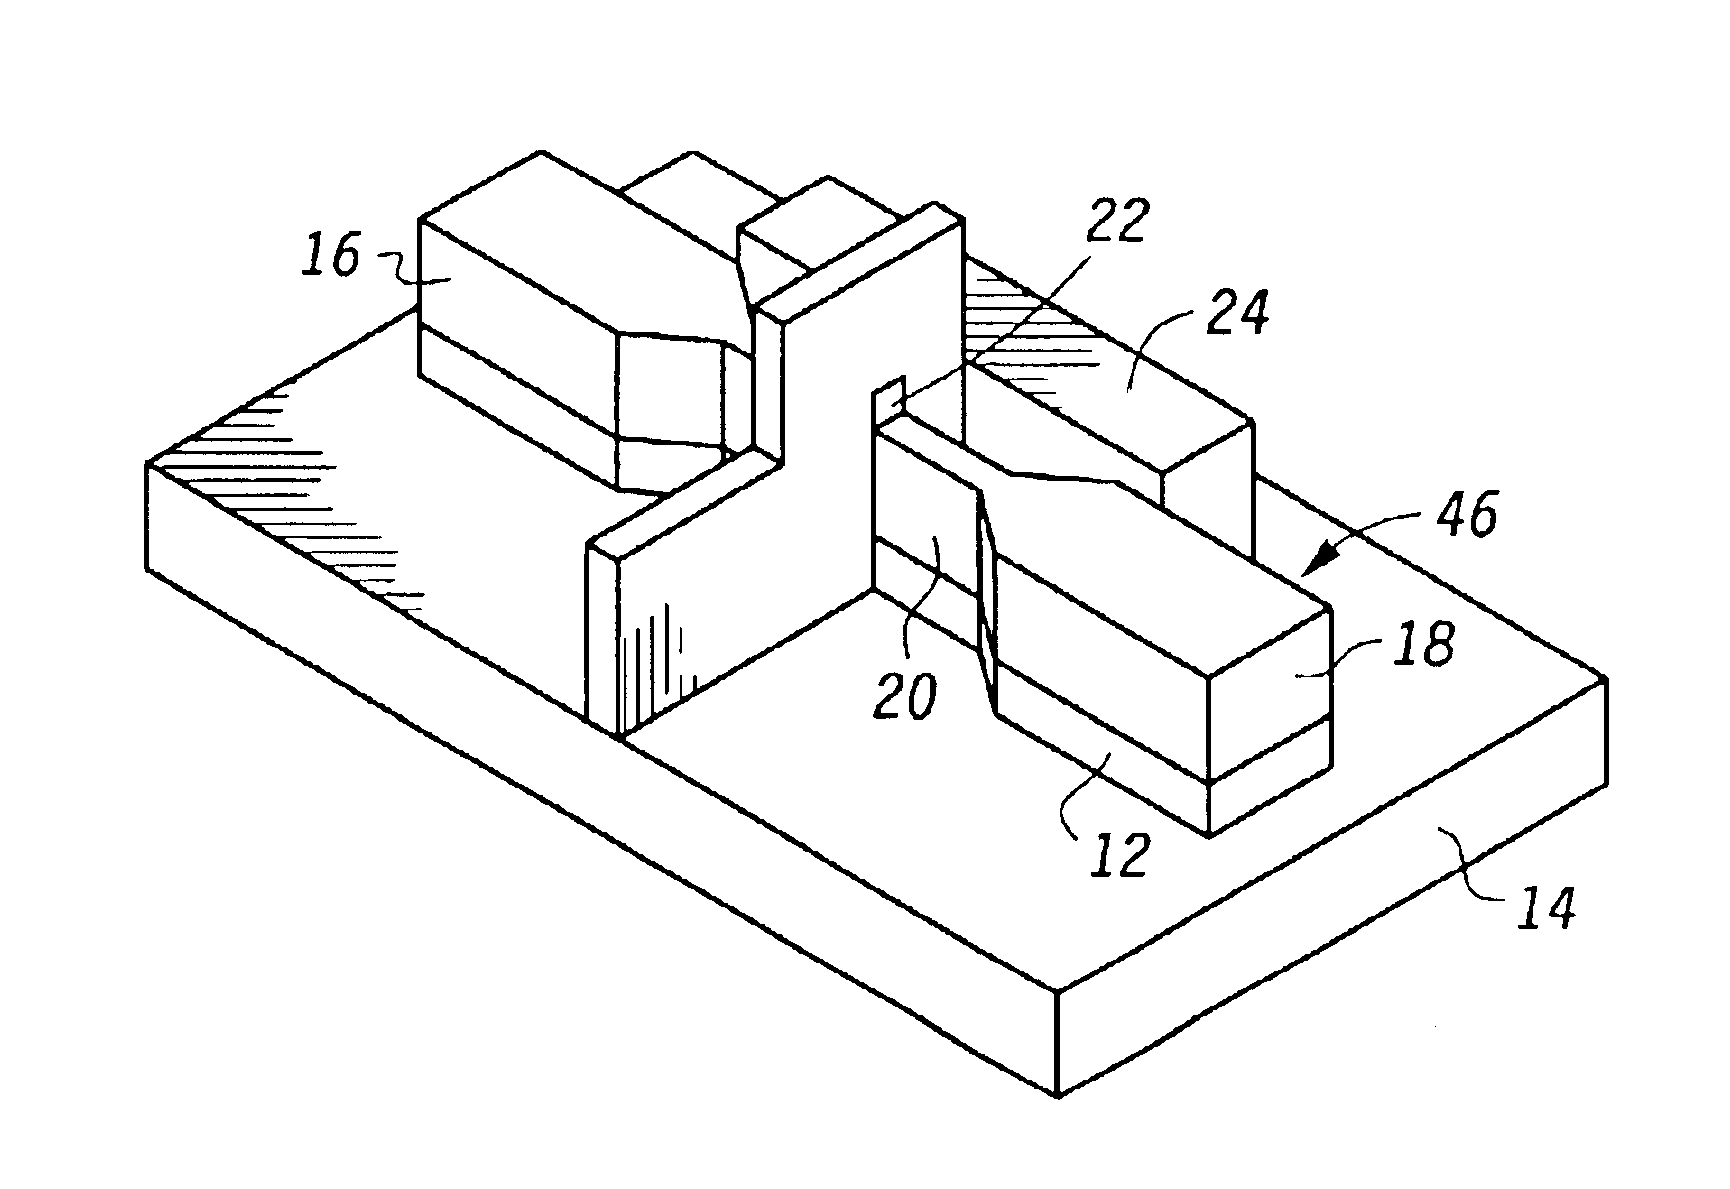 Method for forming a double-gated semiconductor device